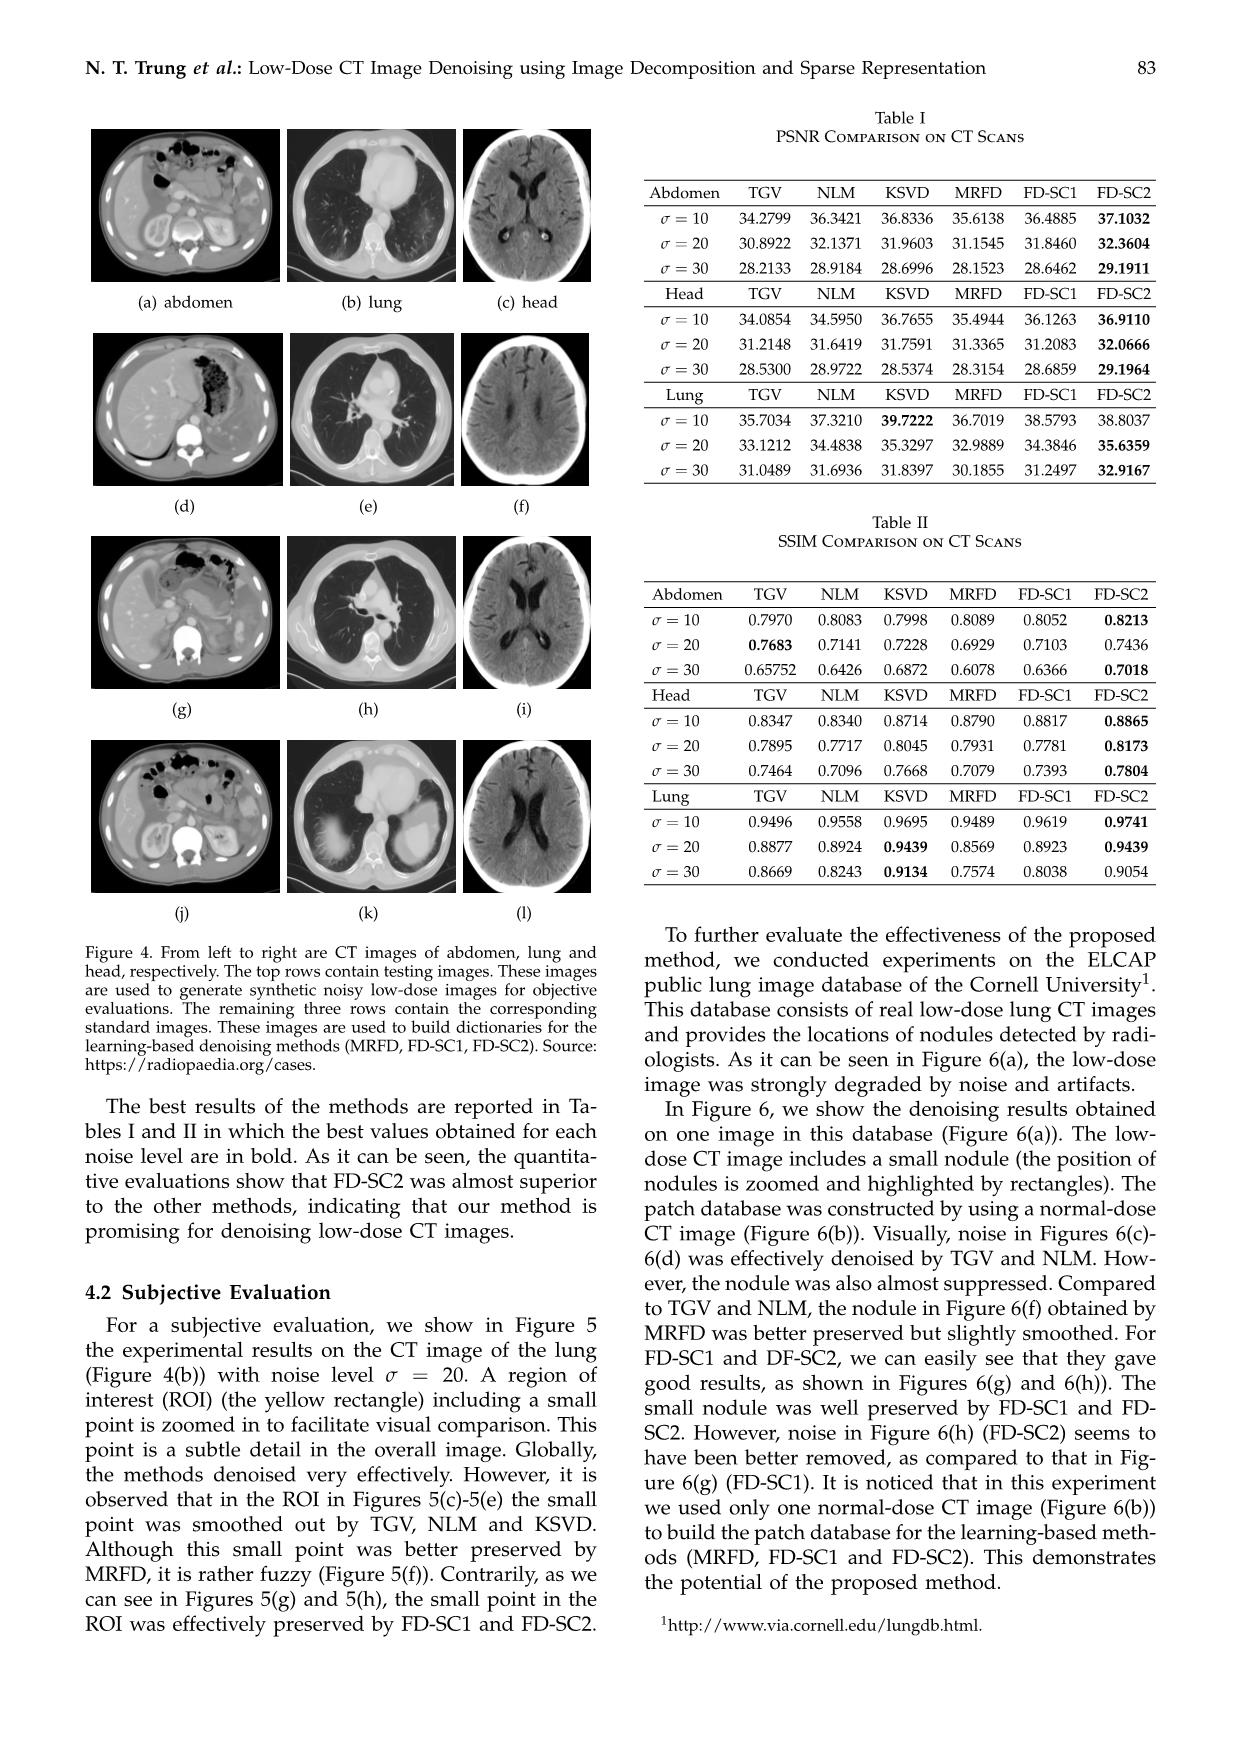 Low-Dose CT image denoising using image decomposition and sparse representation trang 6